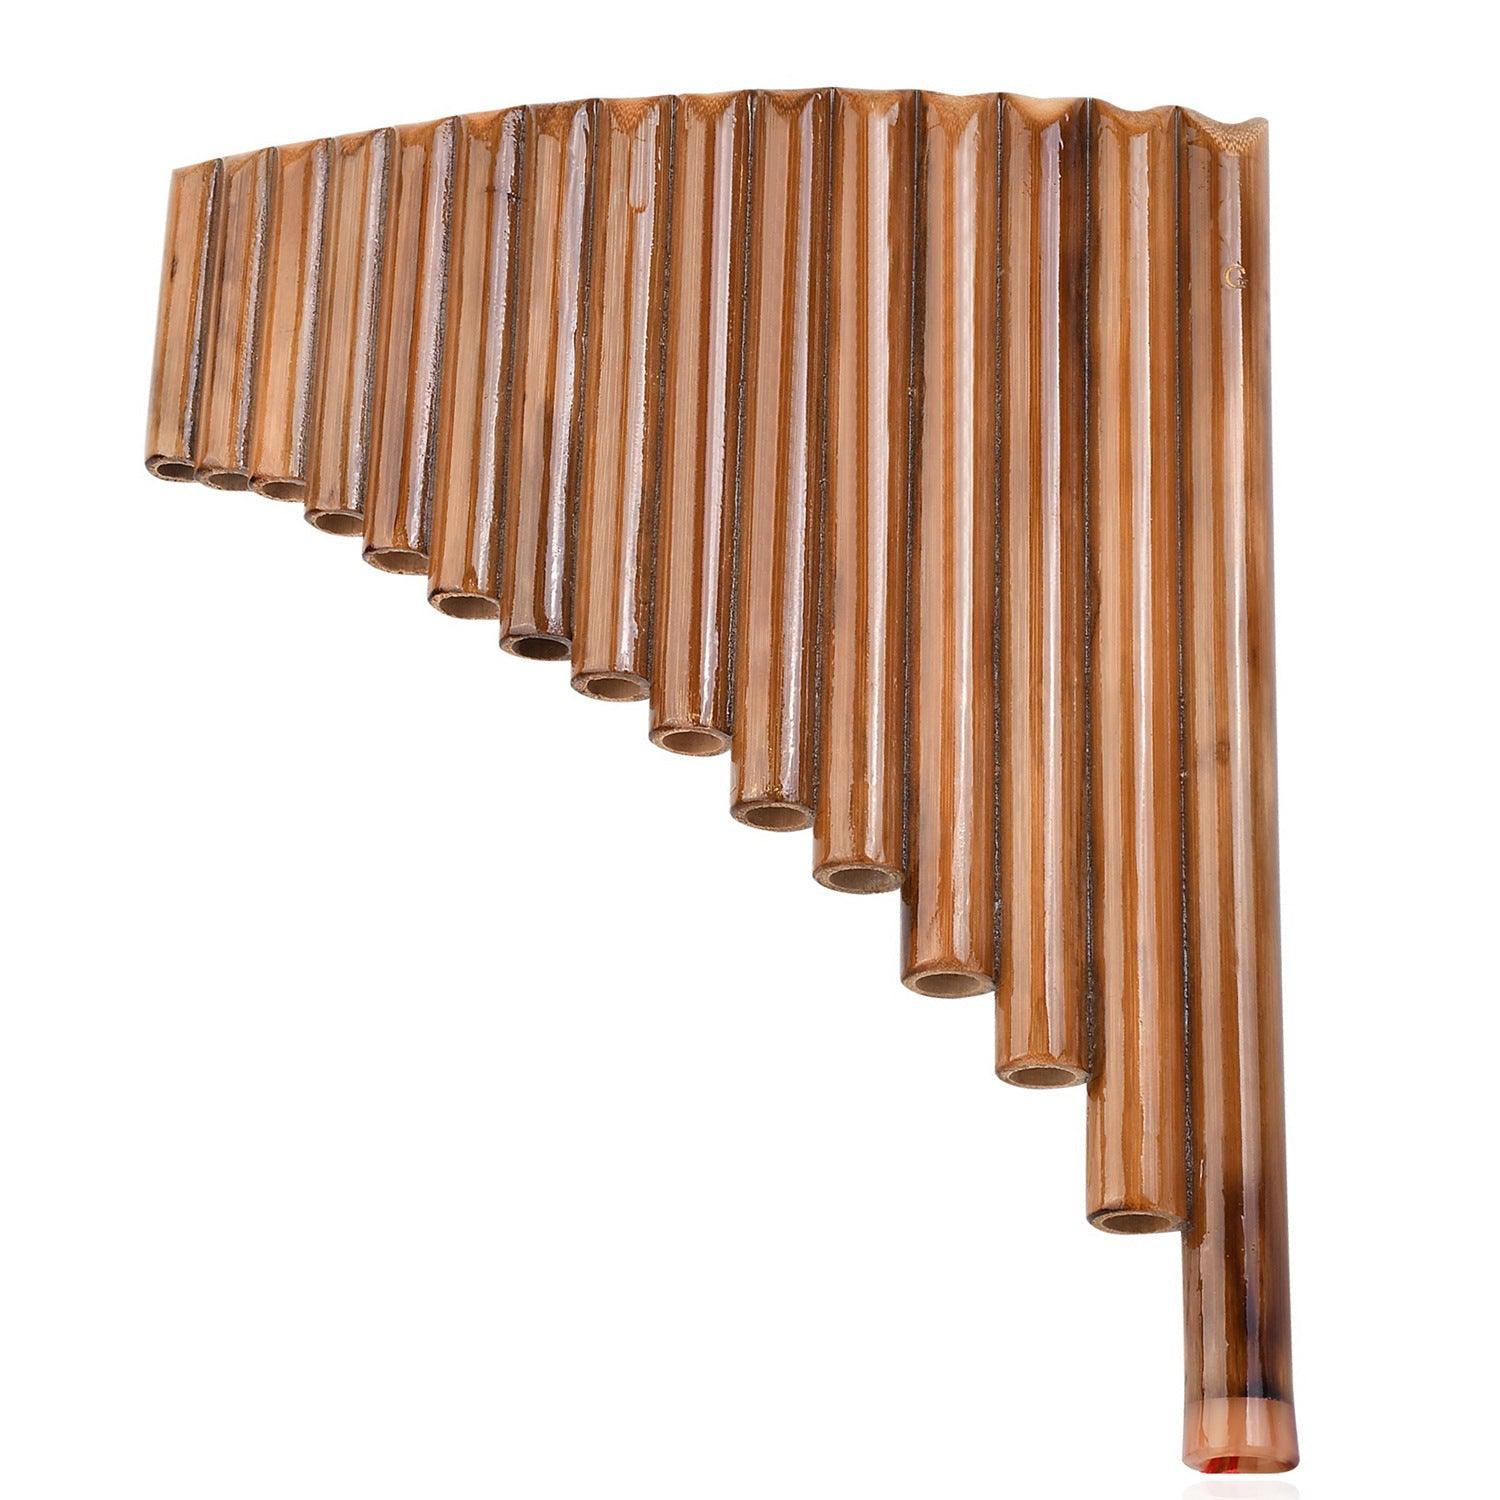 Pan Flute 15 Pipes G Key Bamboo PanPipes Chinese Traditional Musical Instrument - HLURU.SHOP